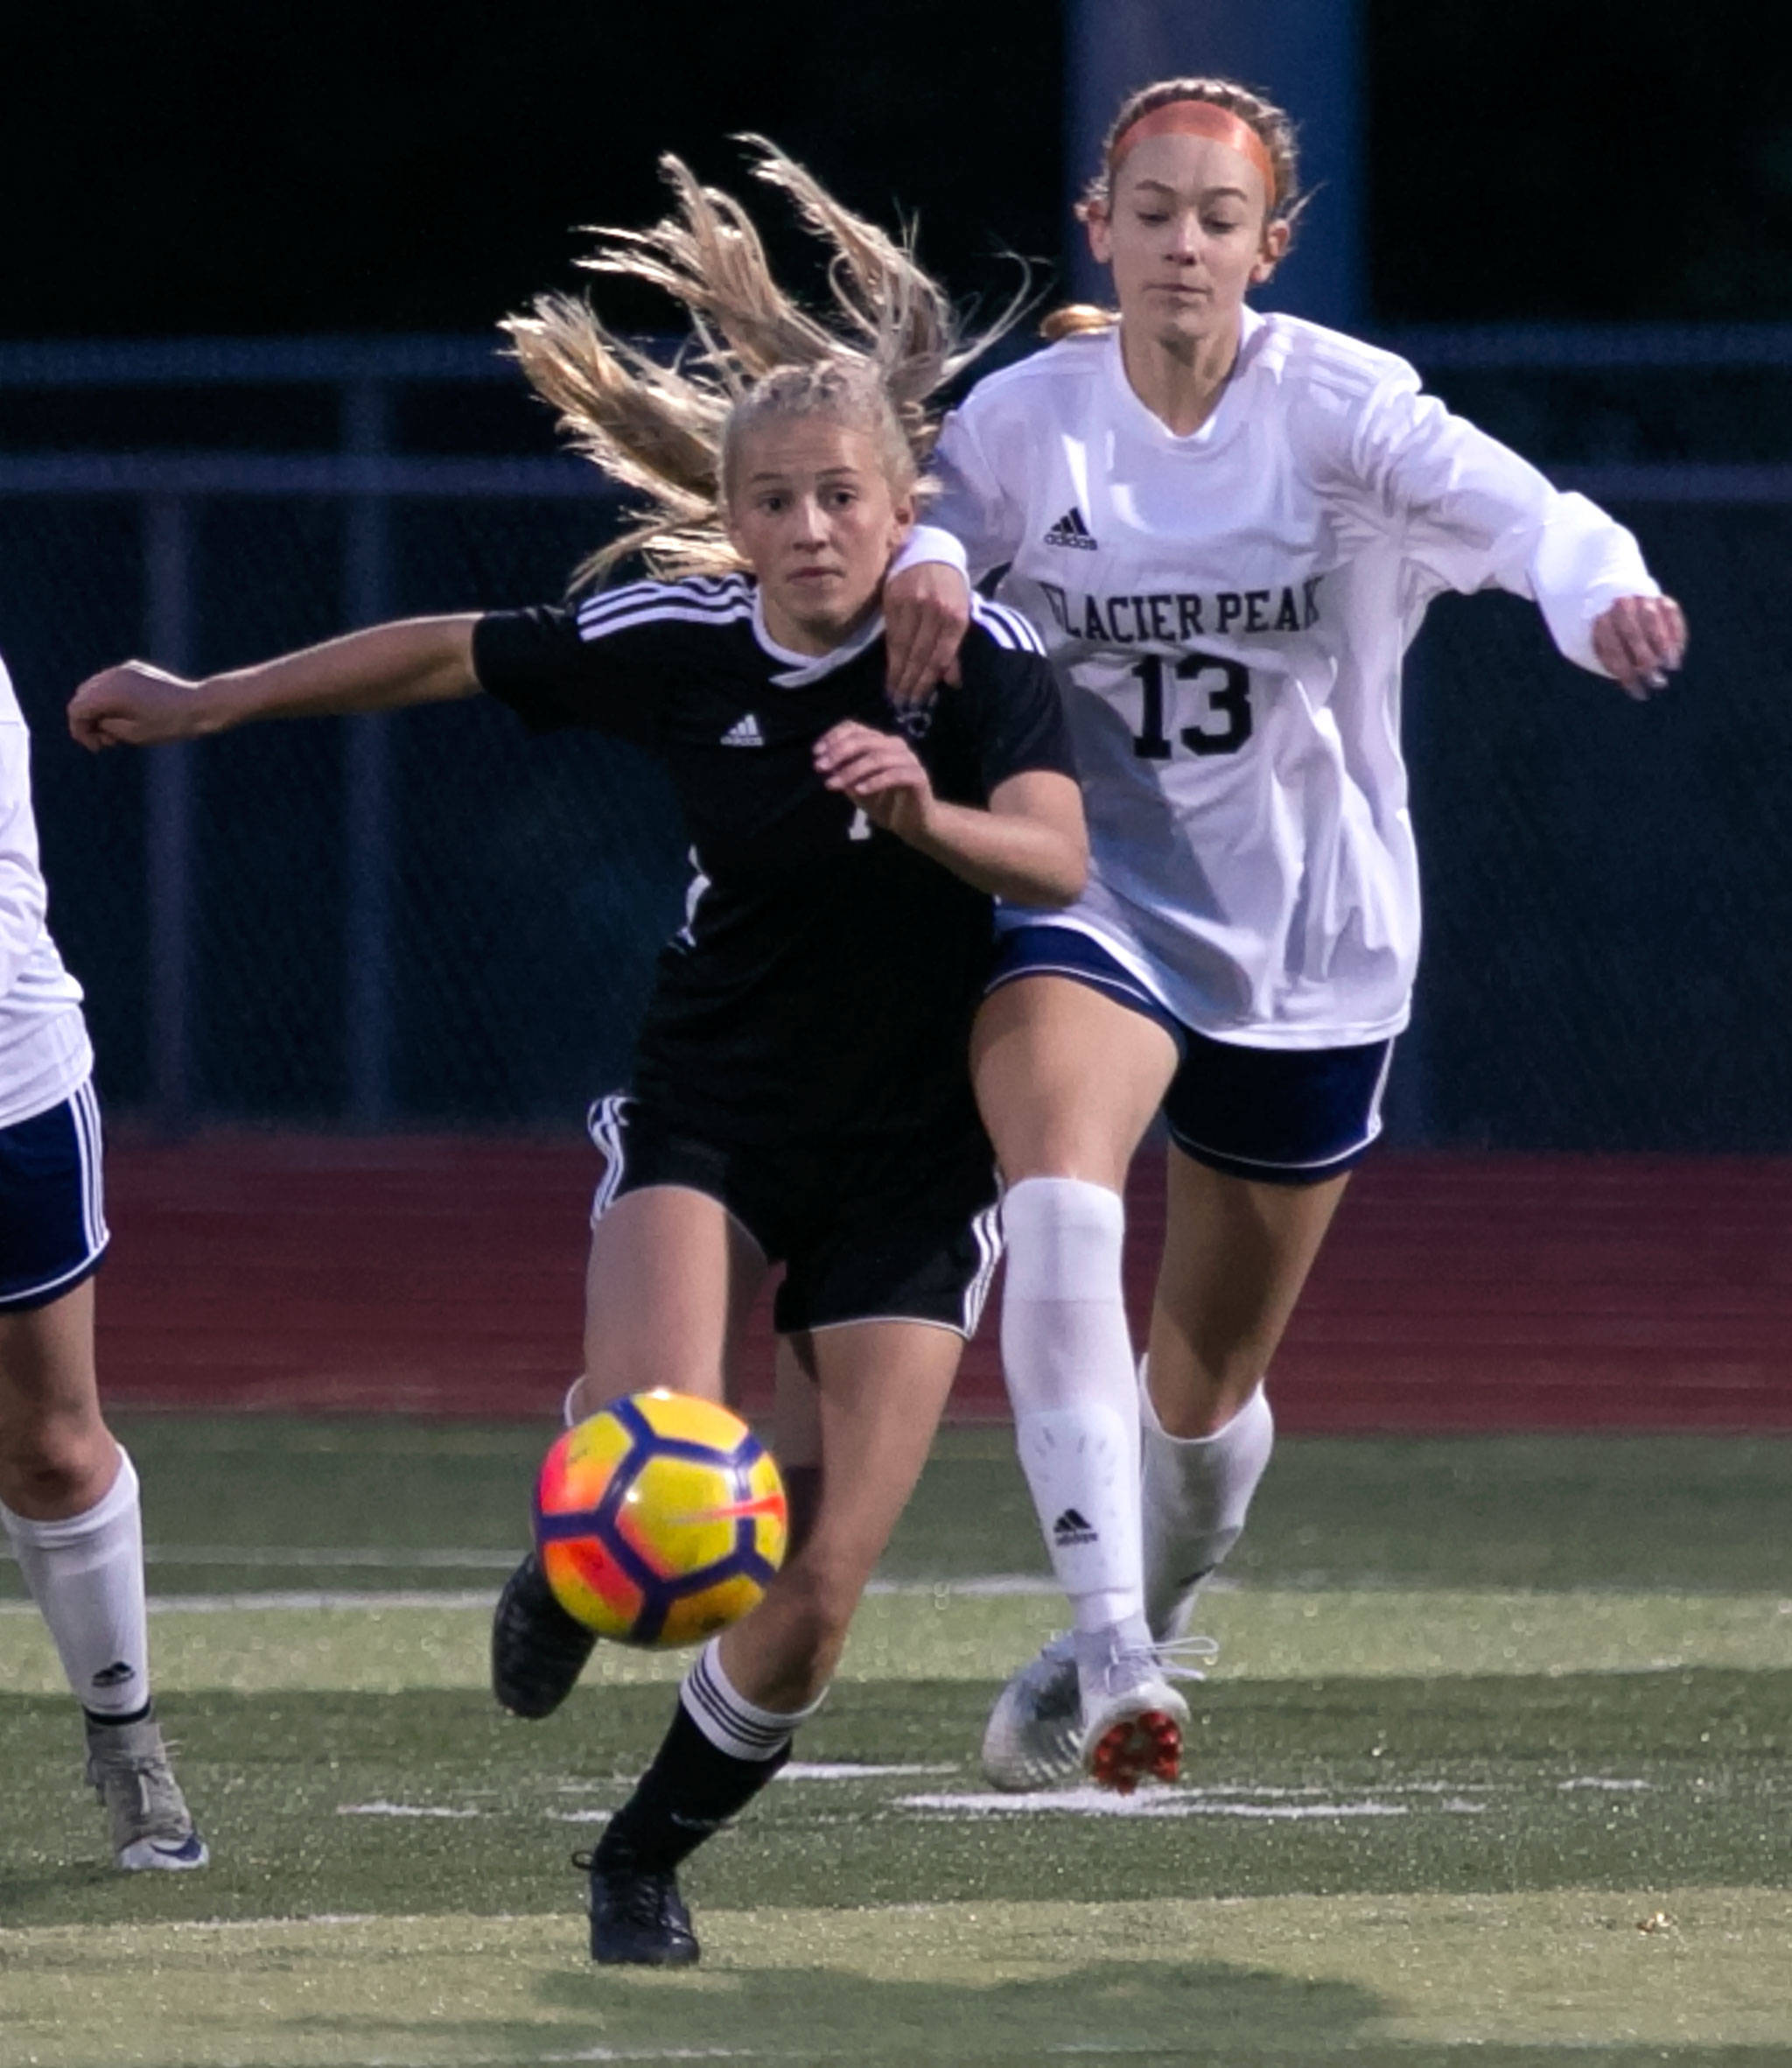 Lake Stevens’ Callaway Knutson (left) and Glacier Peak’s Emily Marriott vie for control of the ball during a Wesco 4A match Tuesday night in Lake Stevens. (Kevin Clark / The Herald)